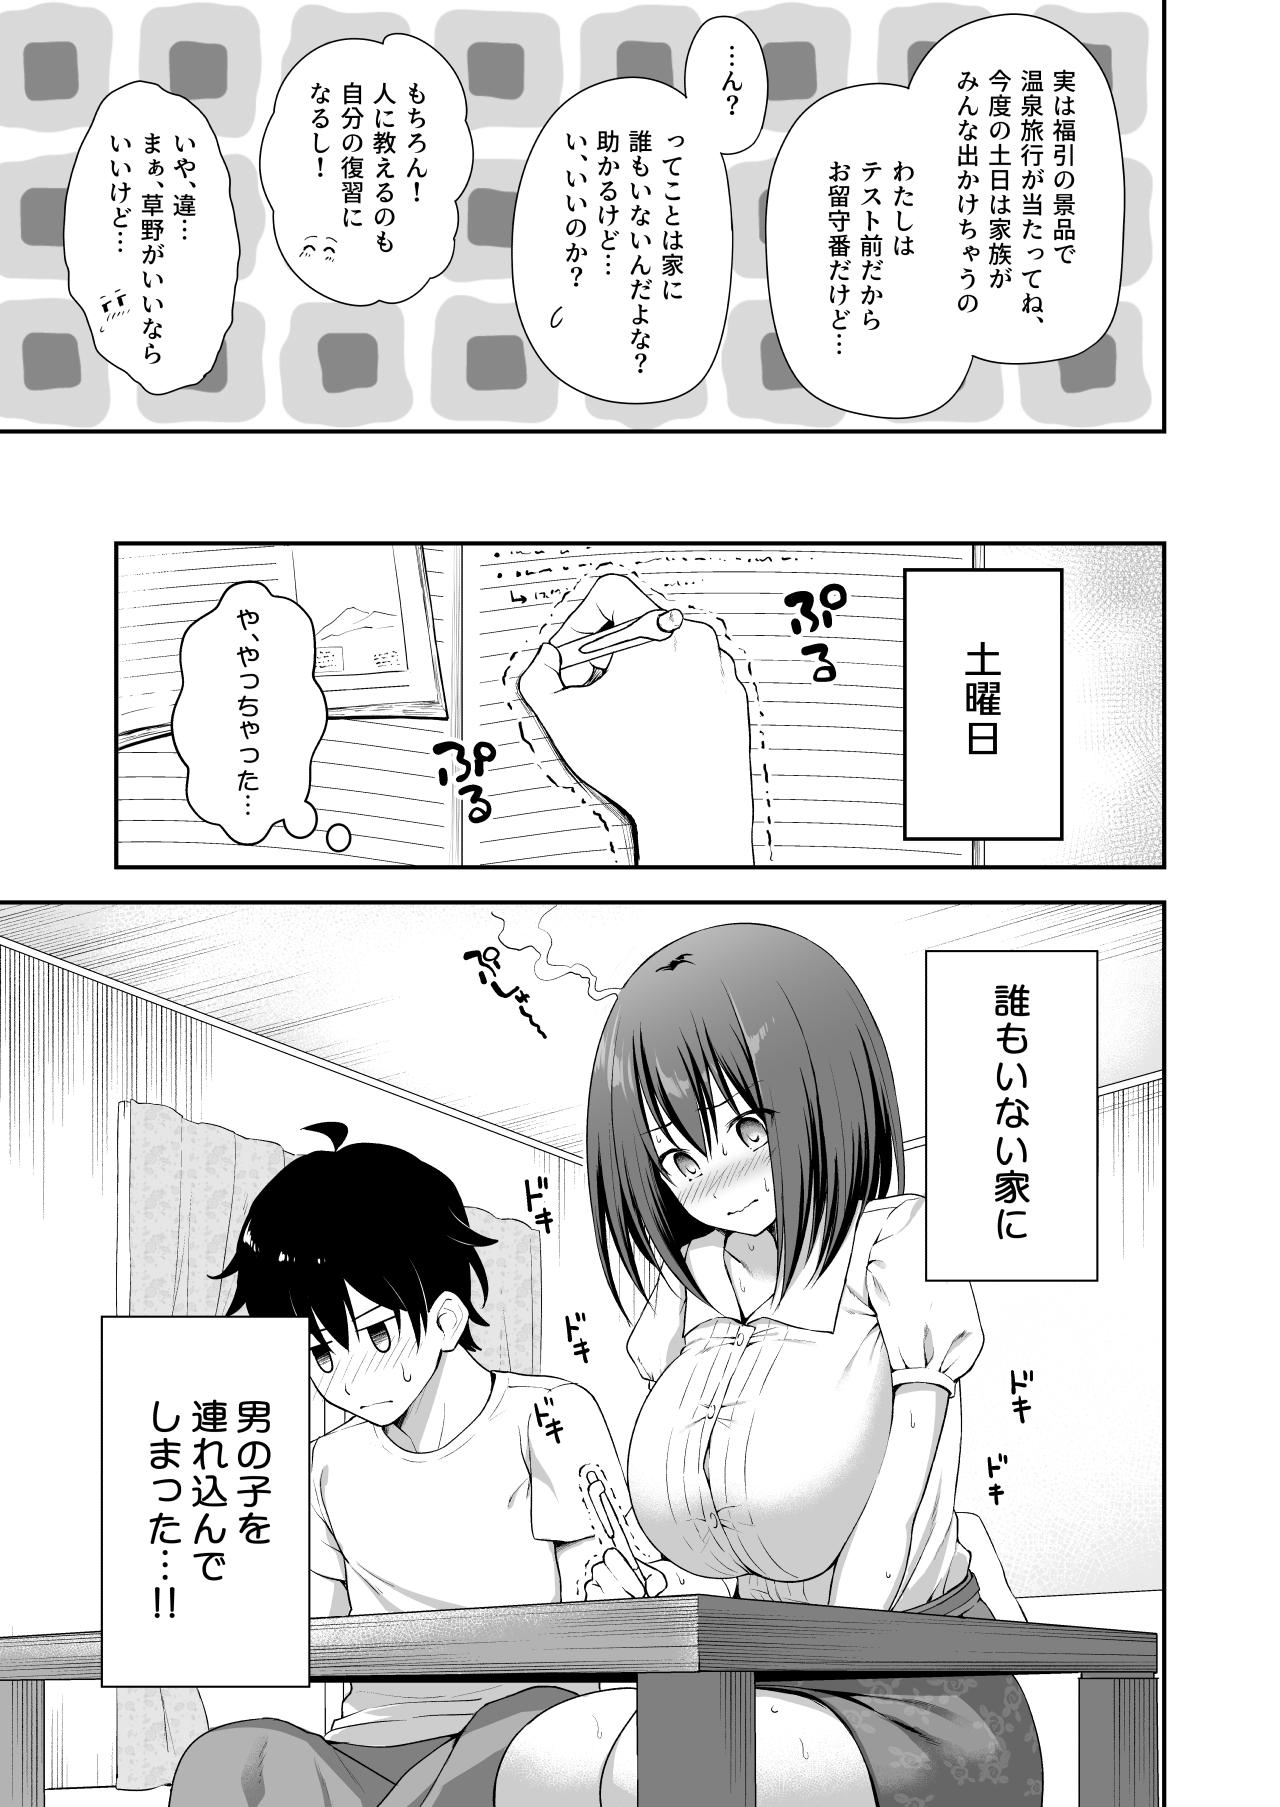 The 優衣コネ - Princess connect Spa - Page 9